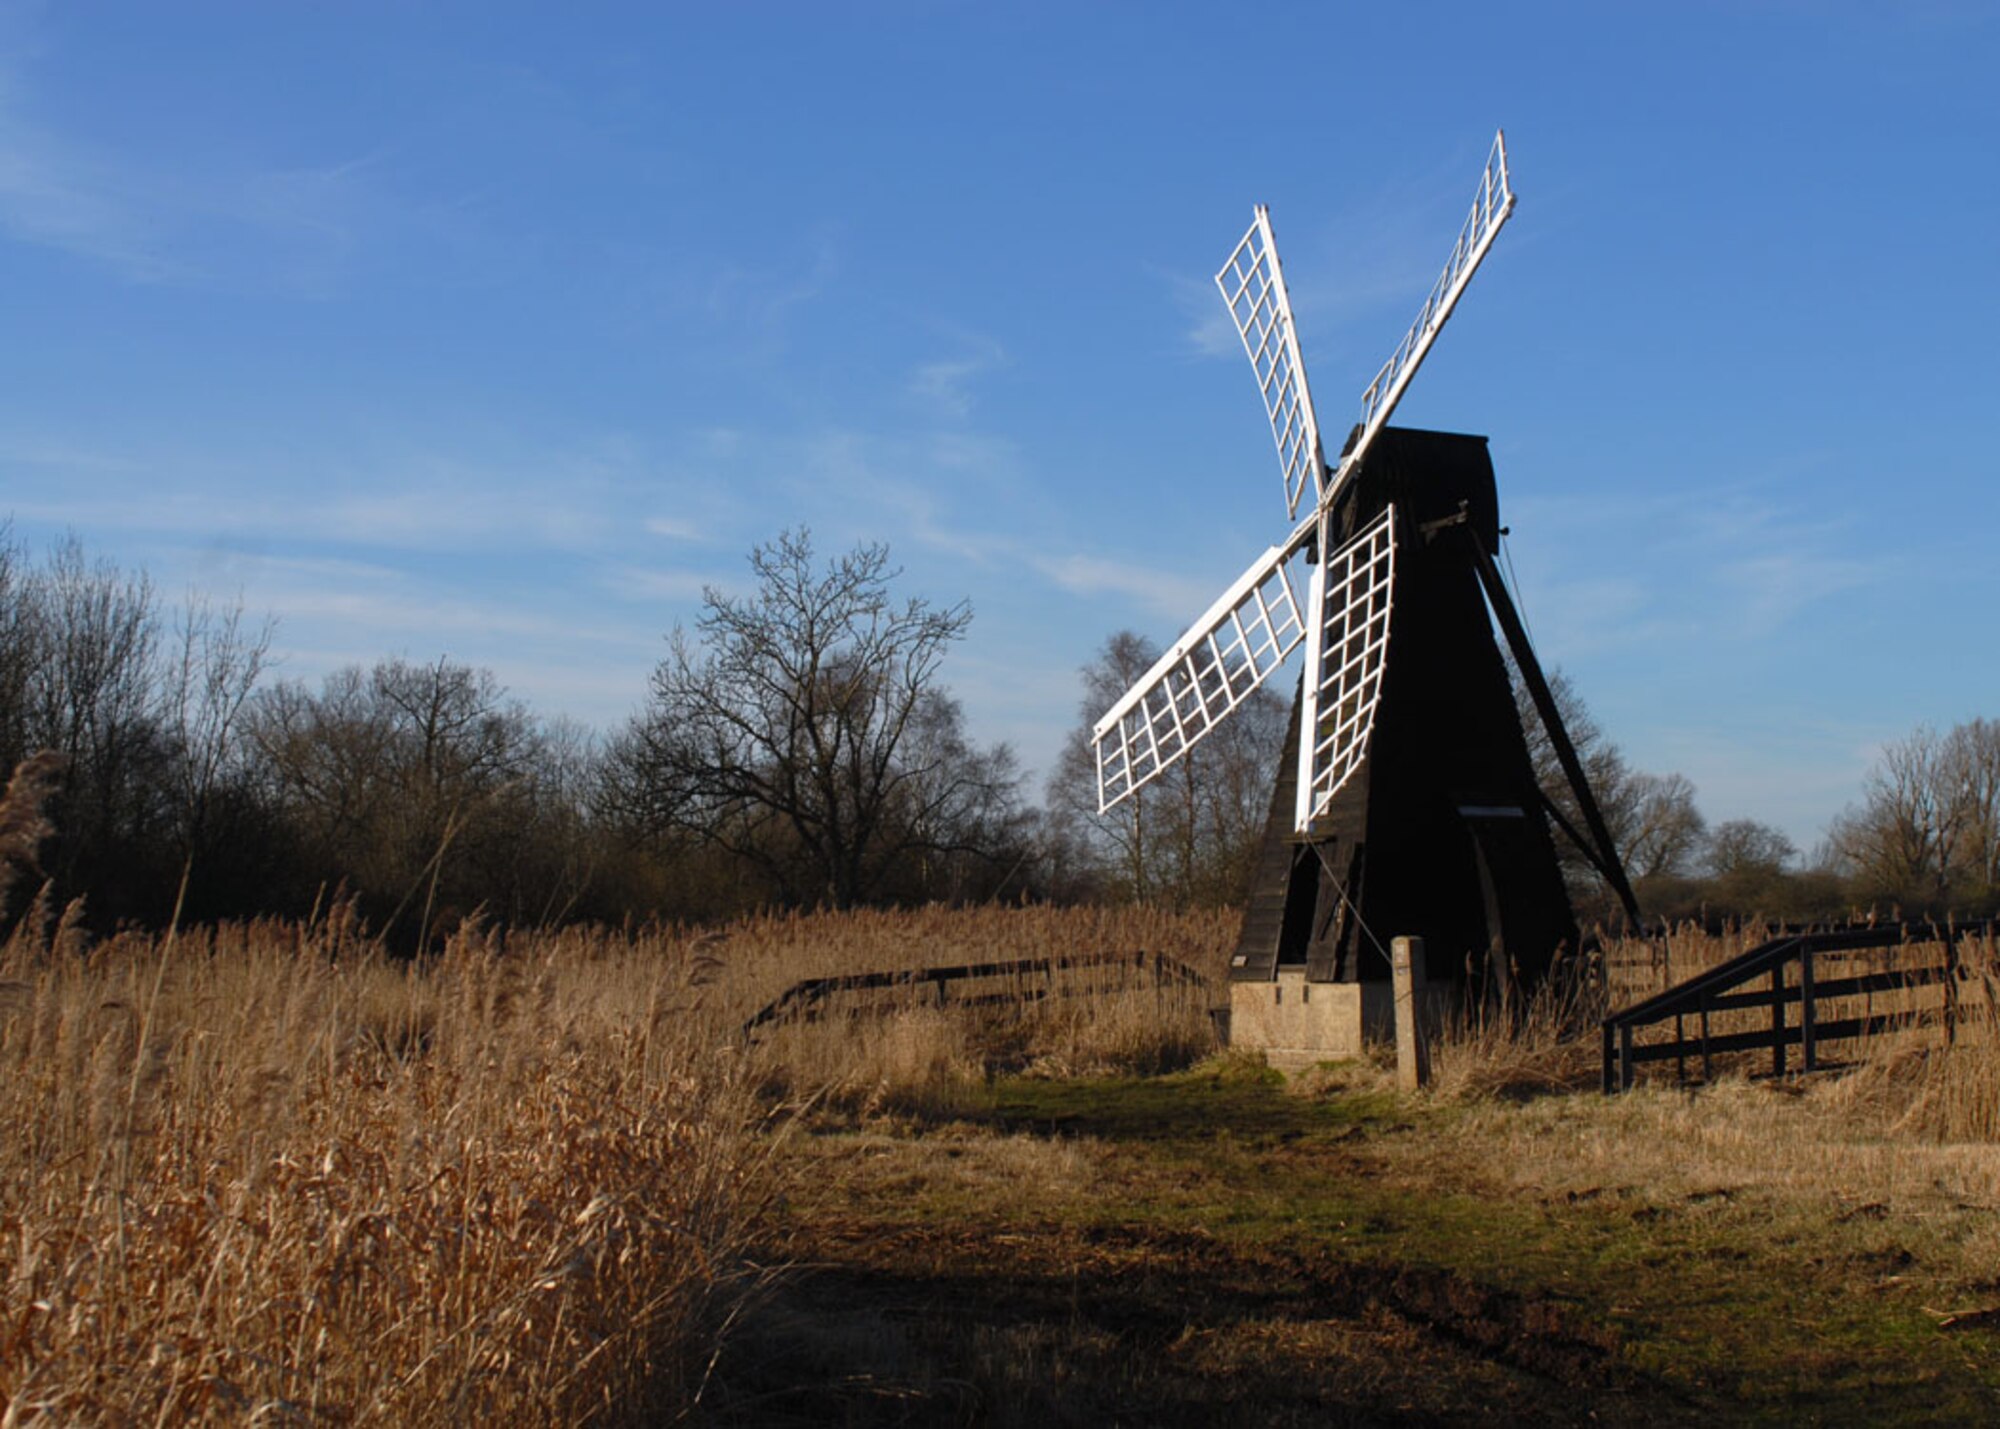 The fen's last working wooden windpump can be found in Wicken Fen National Nature Reserve which has also been identifed as a Site of Special Scientific Interest. (U.S. Air Force photo by Judith Wakelam)